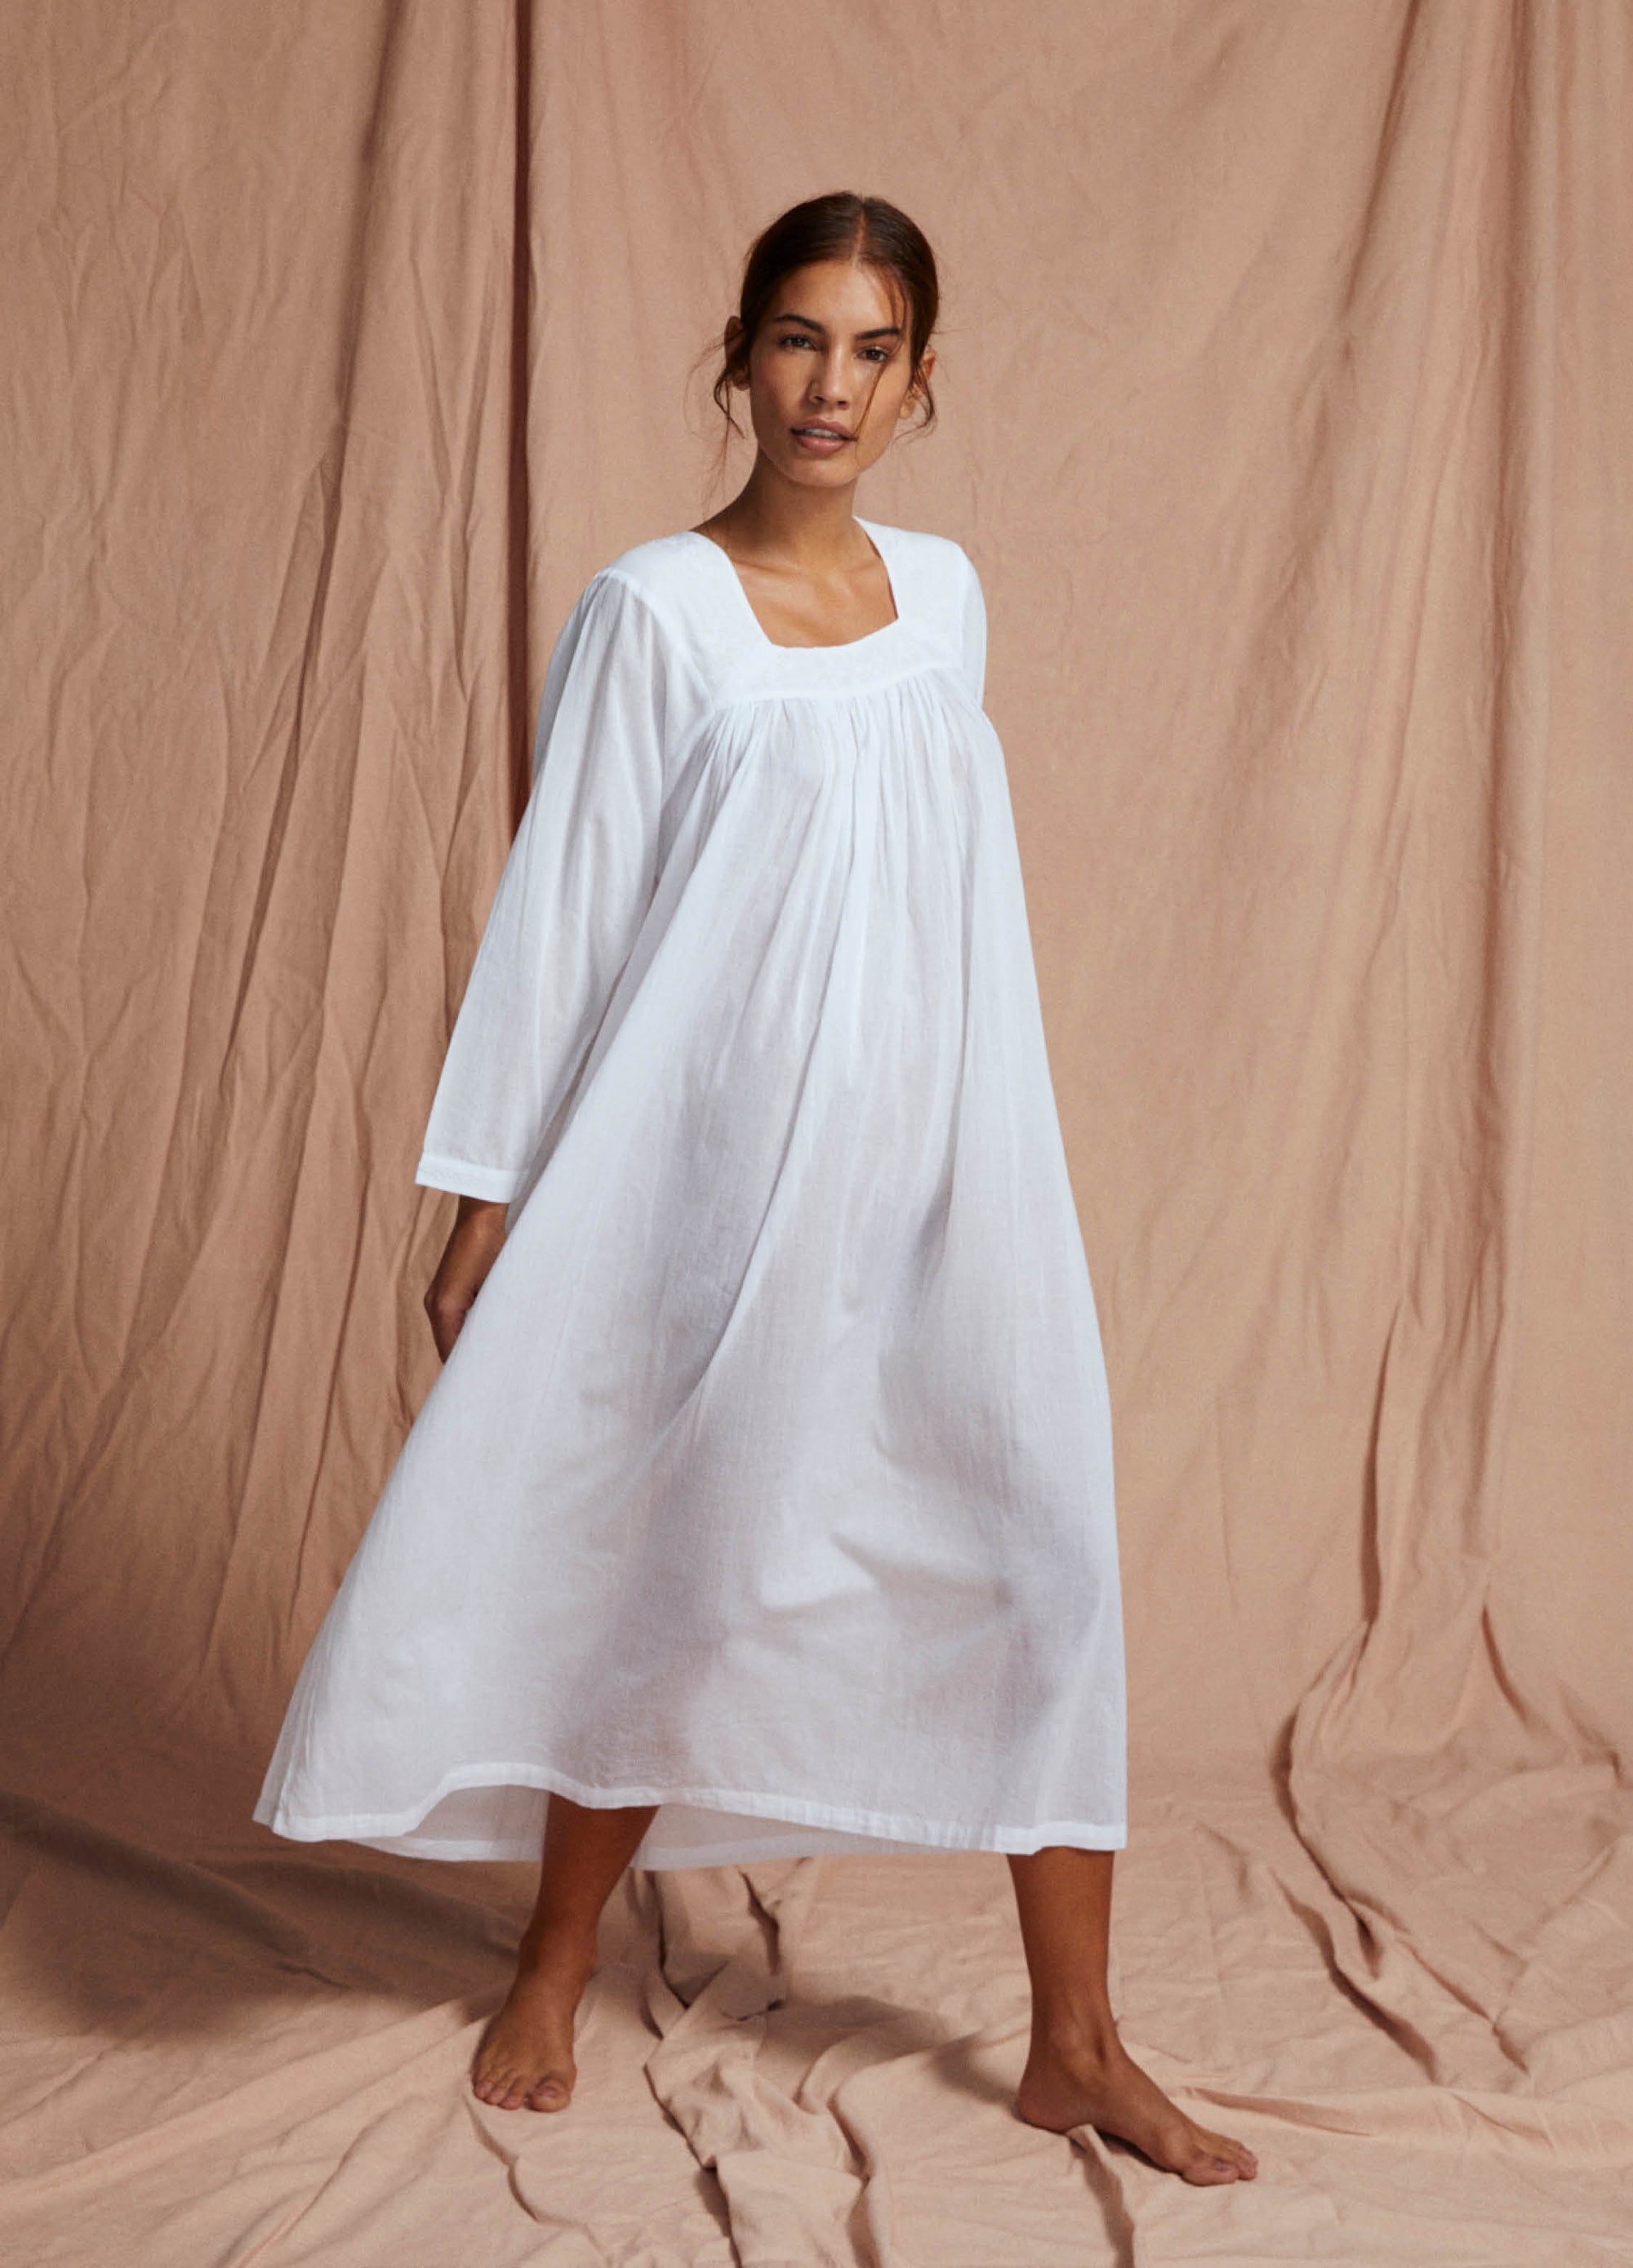 FOUND IN SPAIN Beautifully Made Cotton Night-gown Gorgeous Cotton